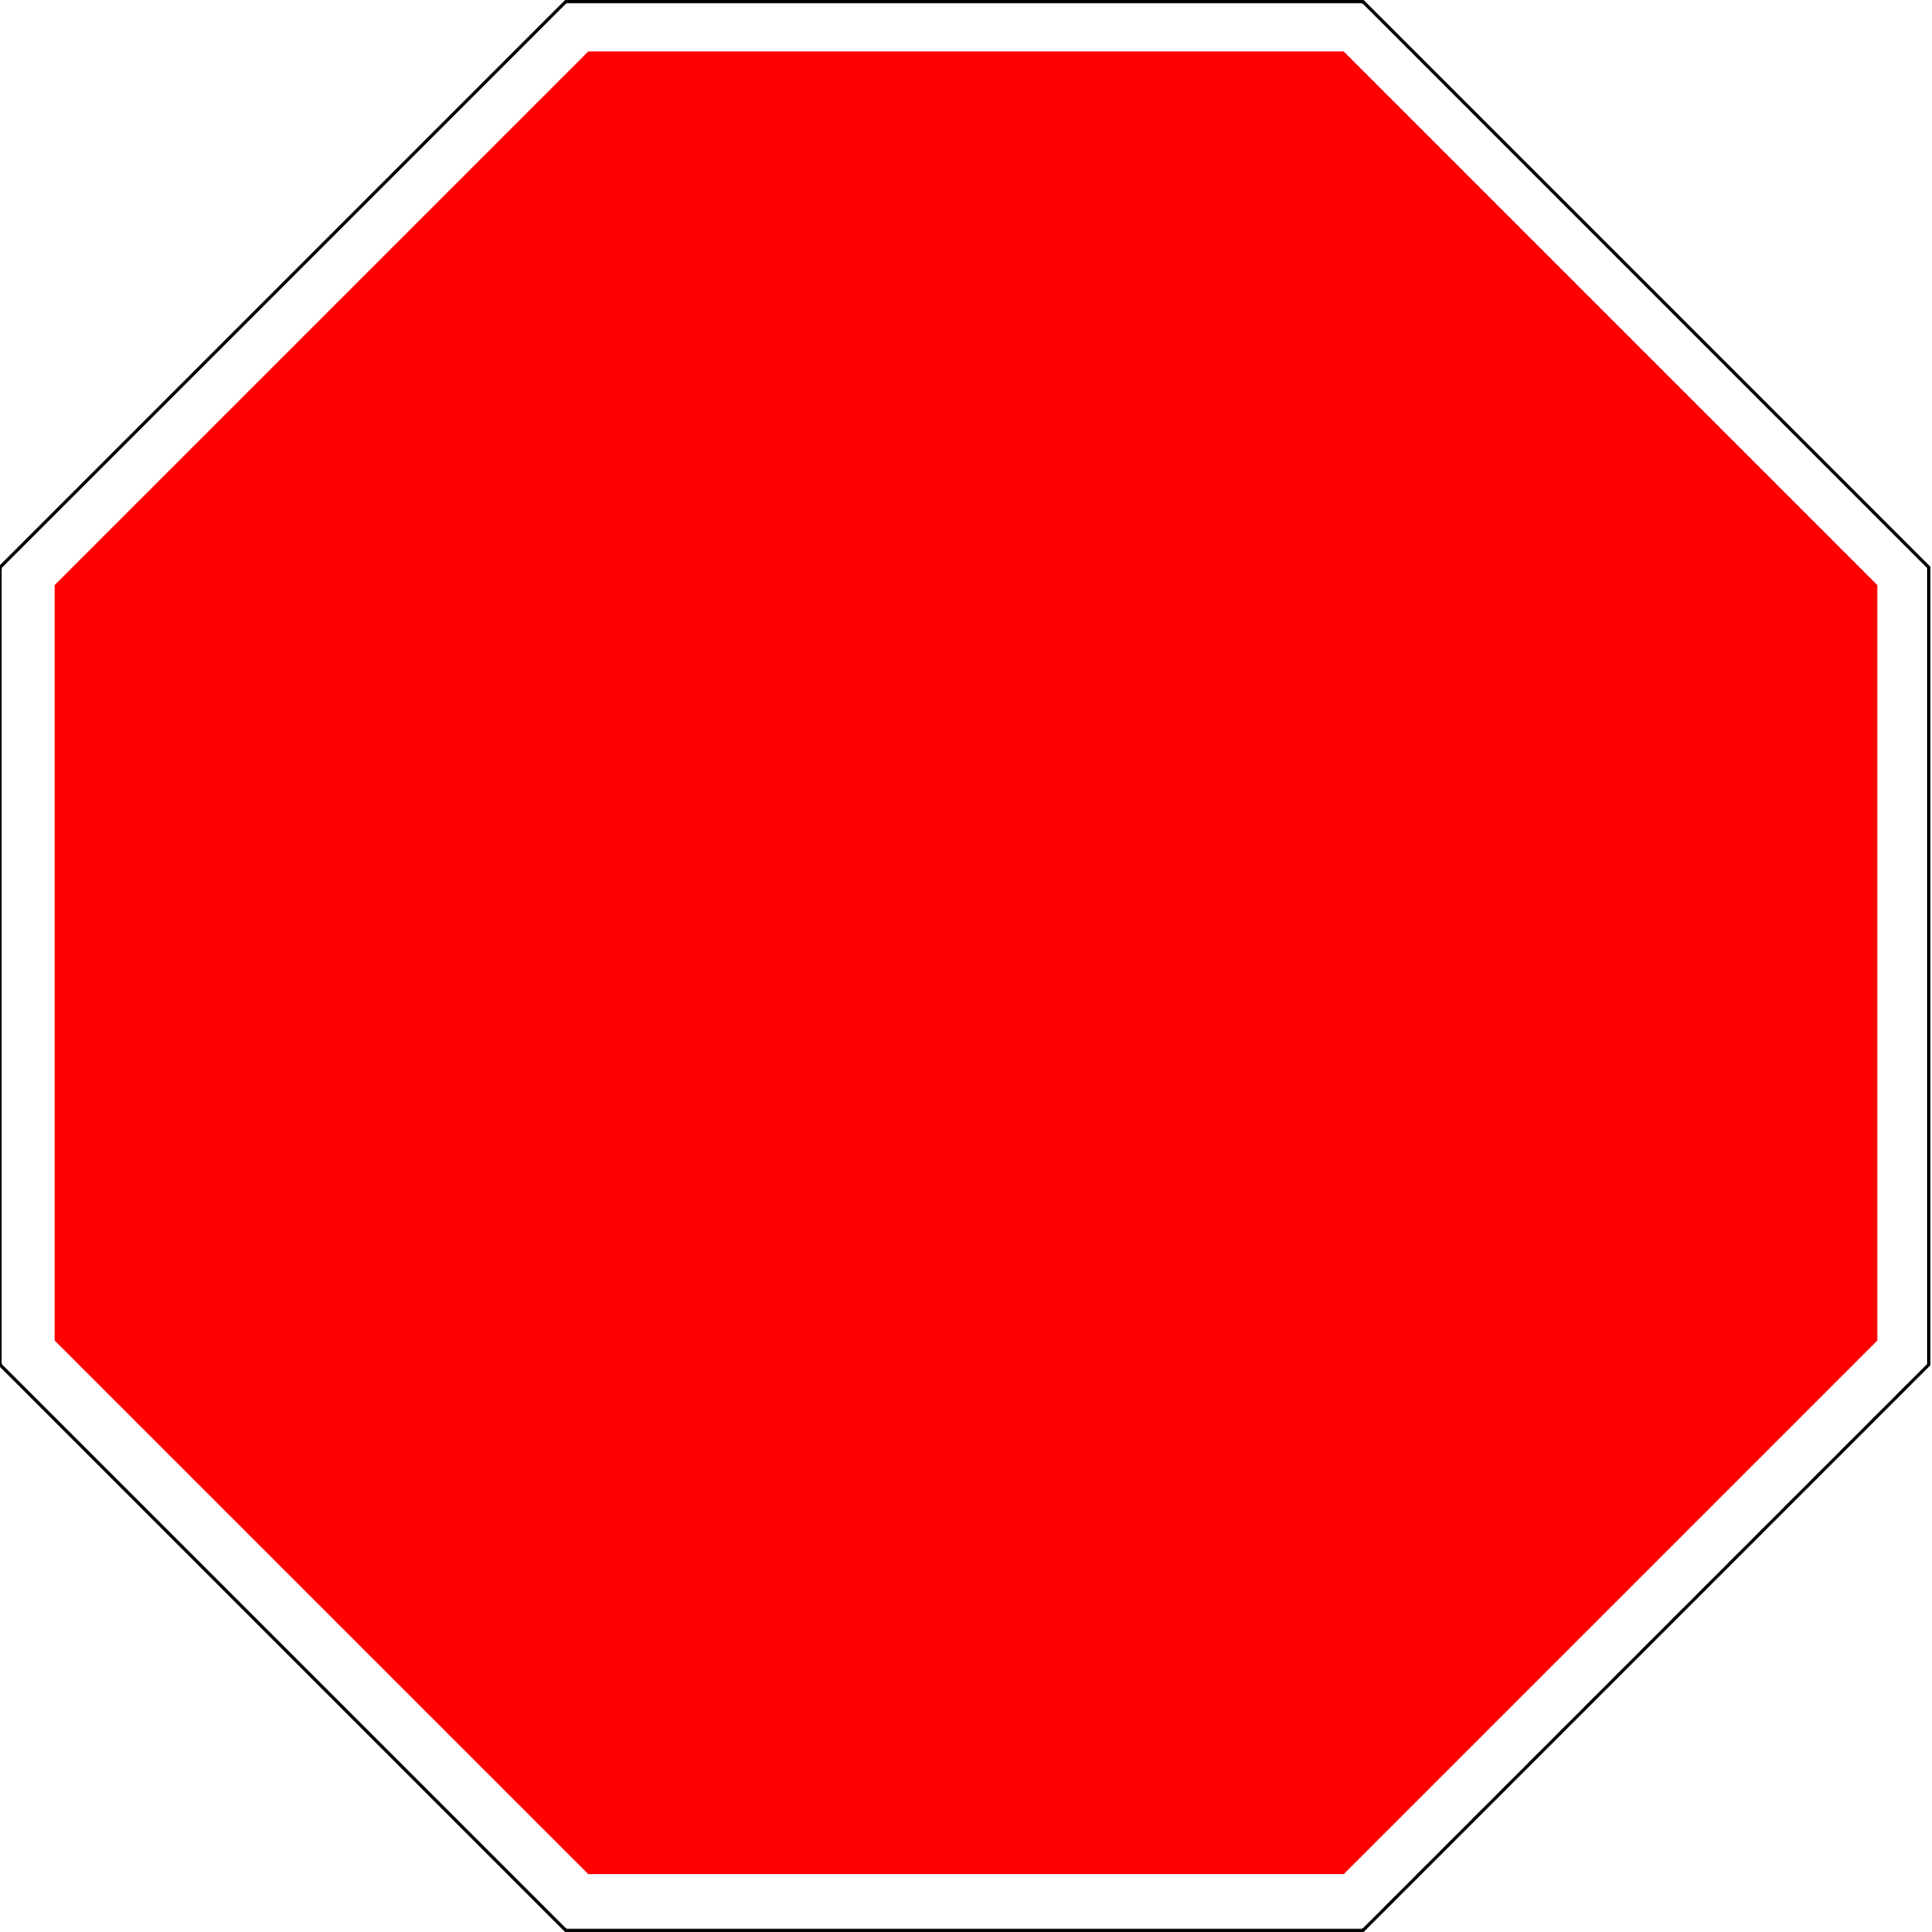 10 Best Images of Printable Blank Signs Blank Stop Sign Octagon, Free